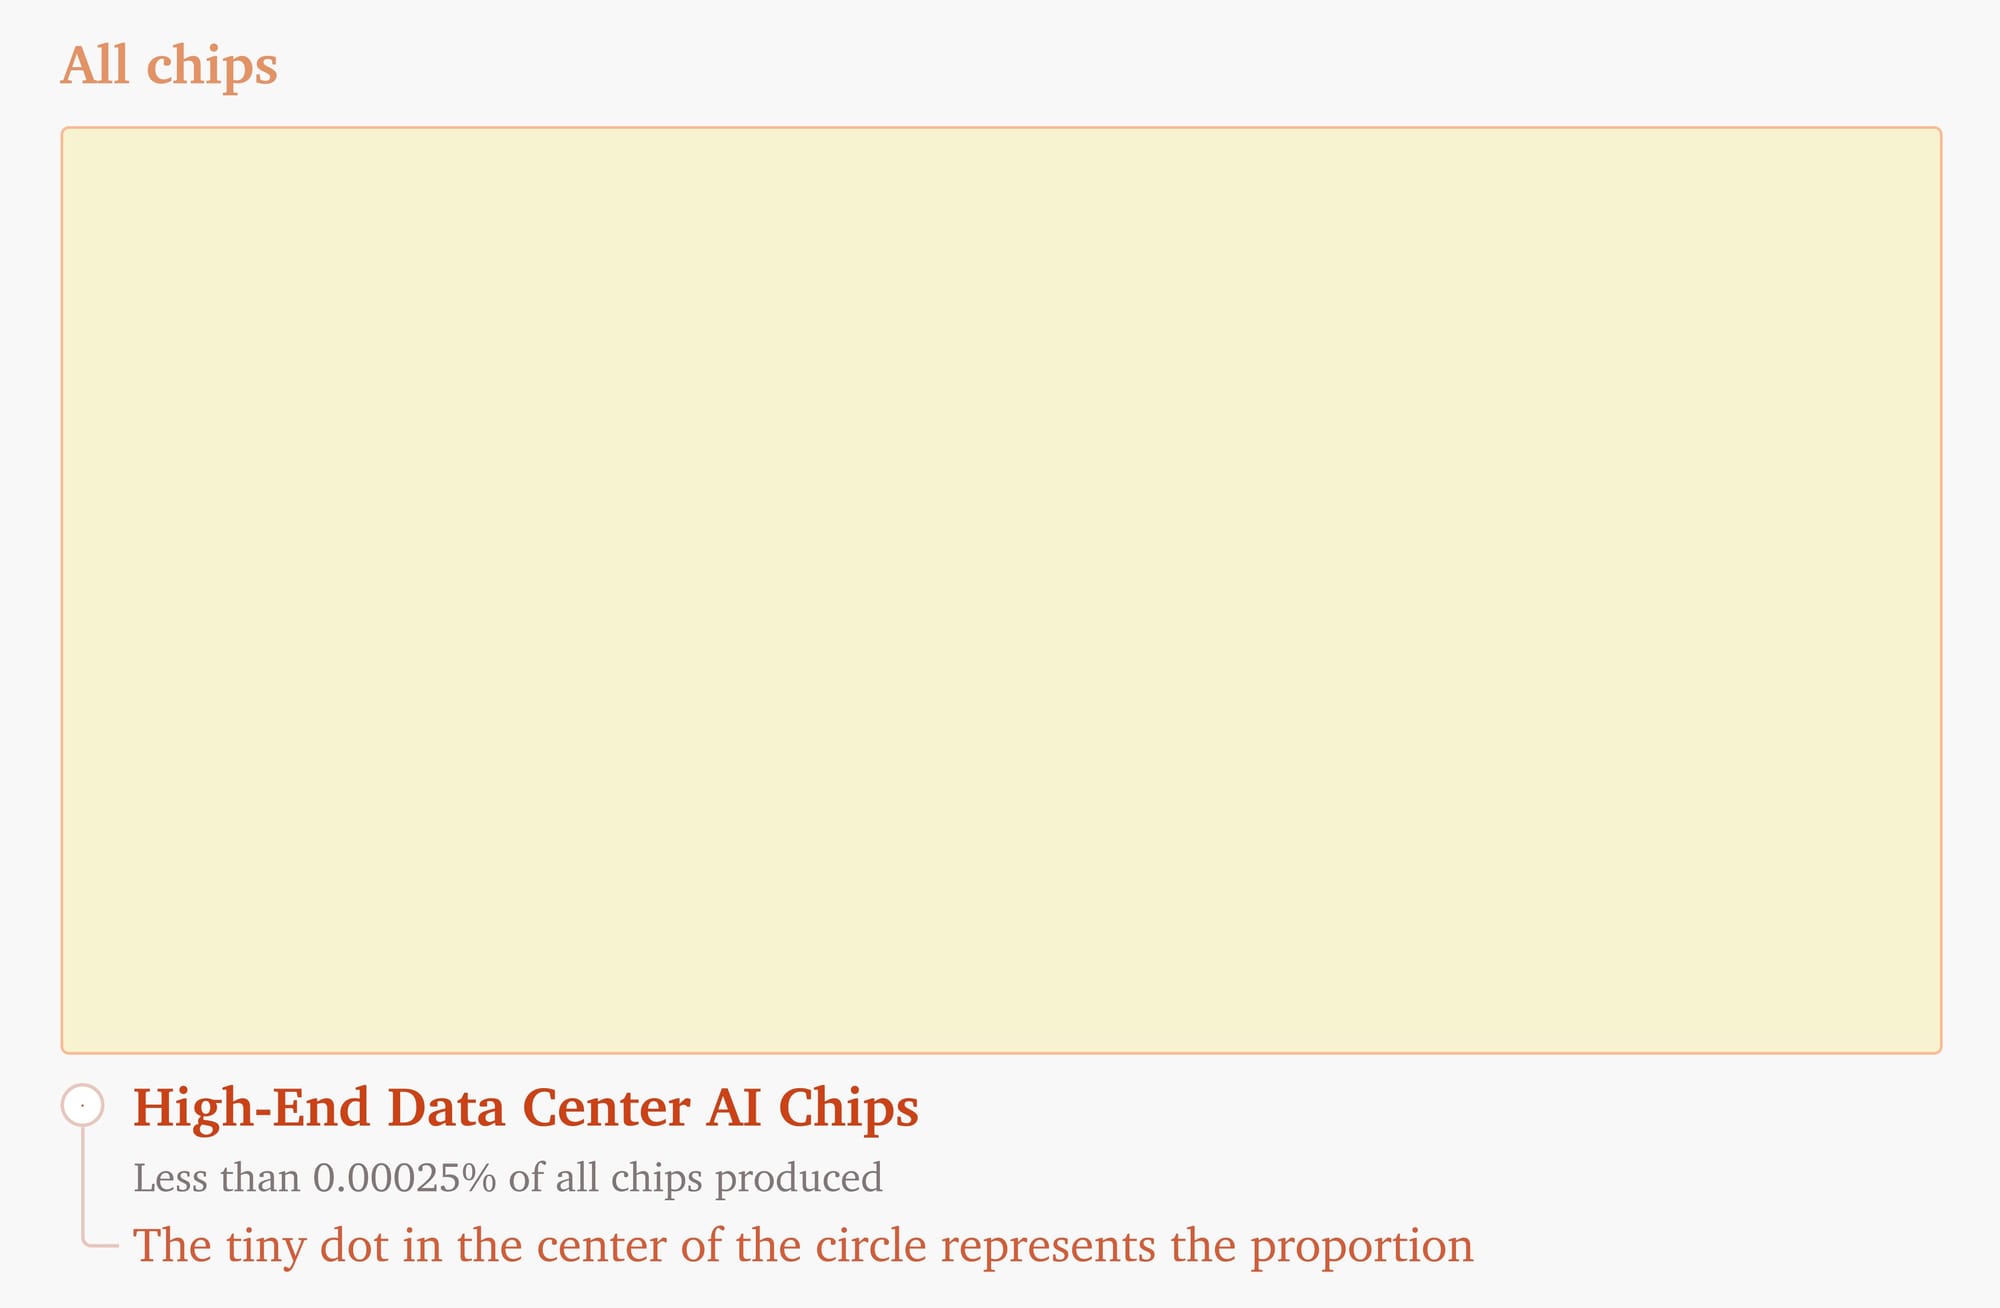 What share of all chips are high-end data center AI chips?